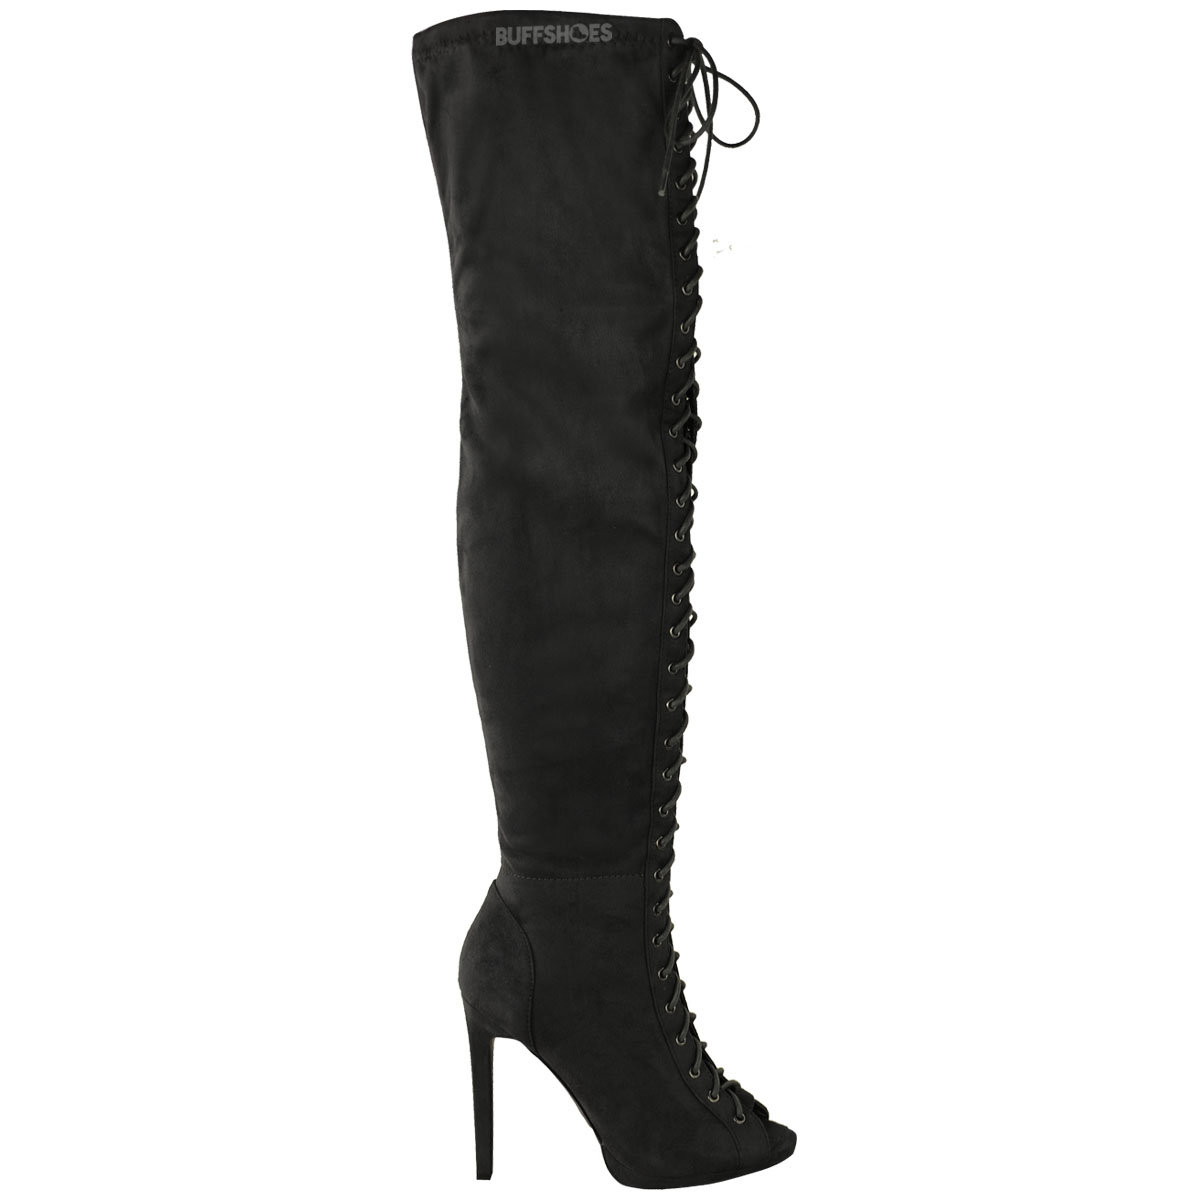 WOMENS LADIES THIGH HIGH OVER THE KNEE PLATFORM LACE UP BOOTS STILETTO ...